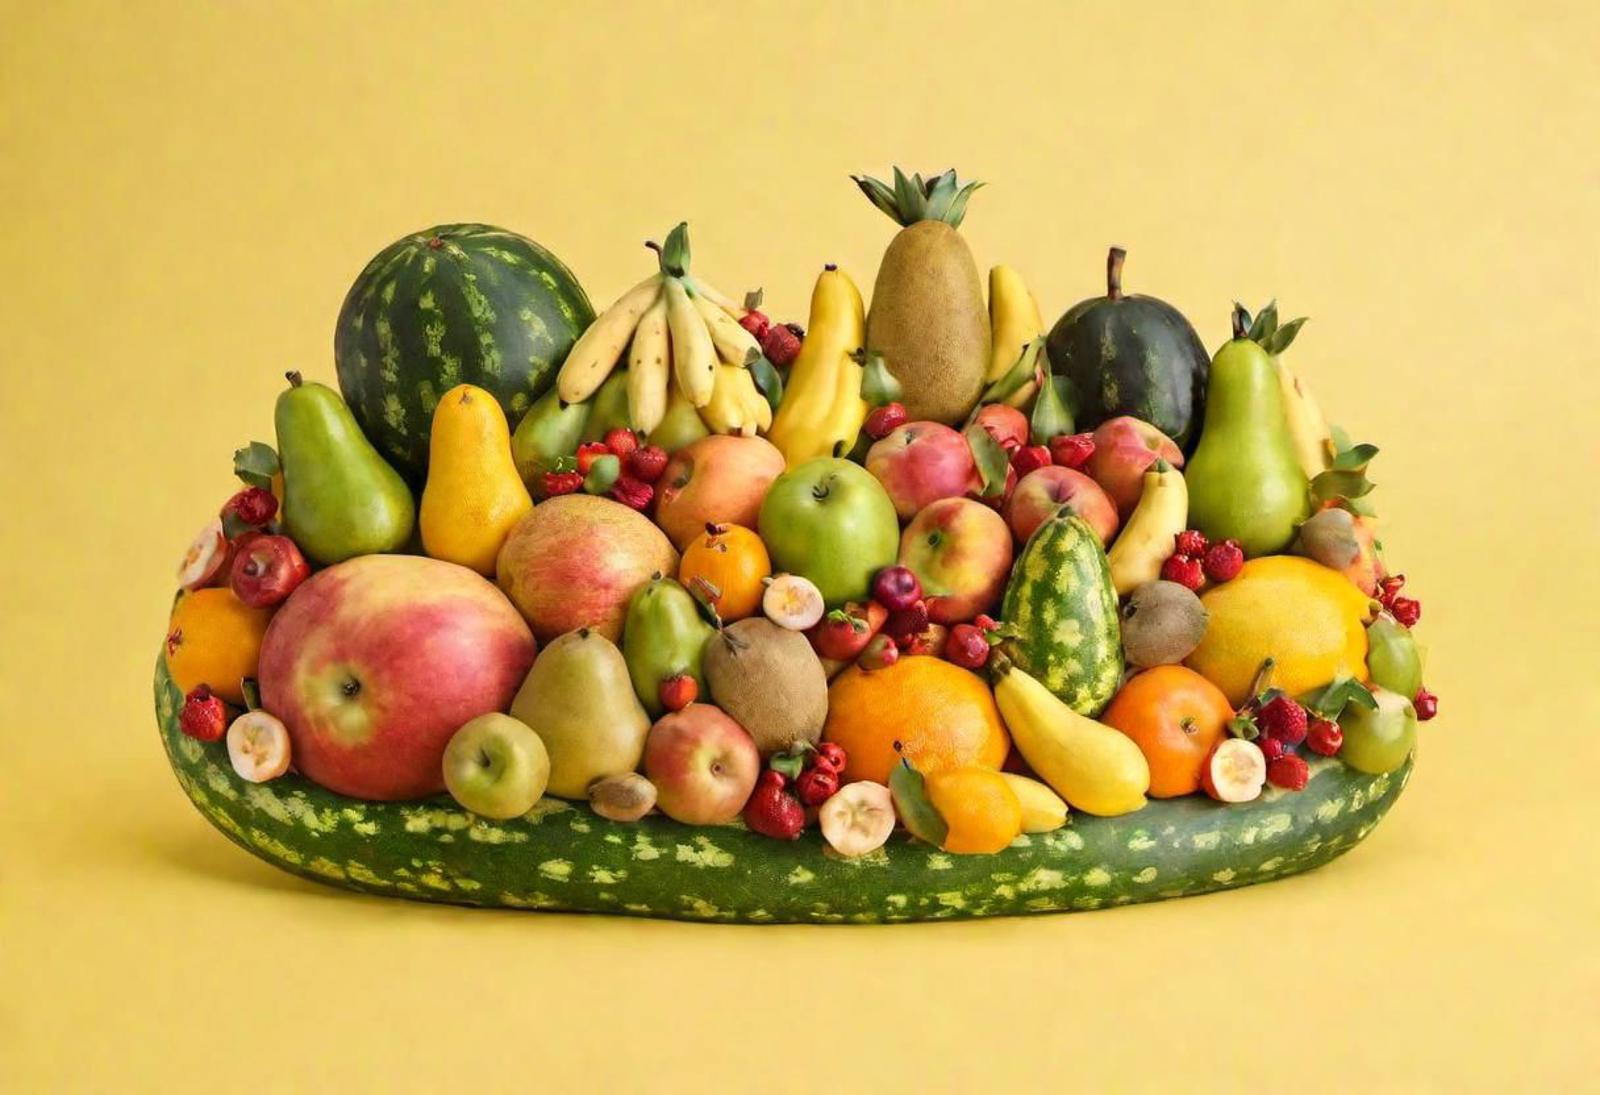 Made from fruits. SDXL image by Eradic